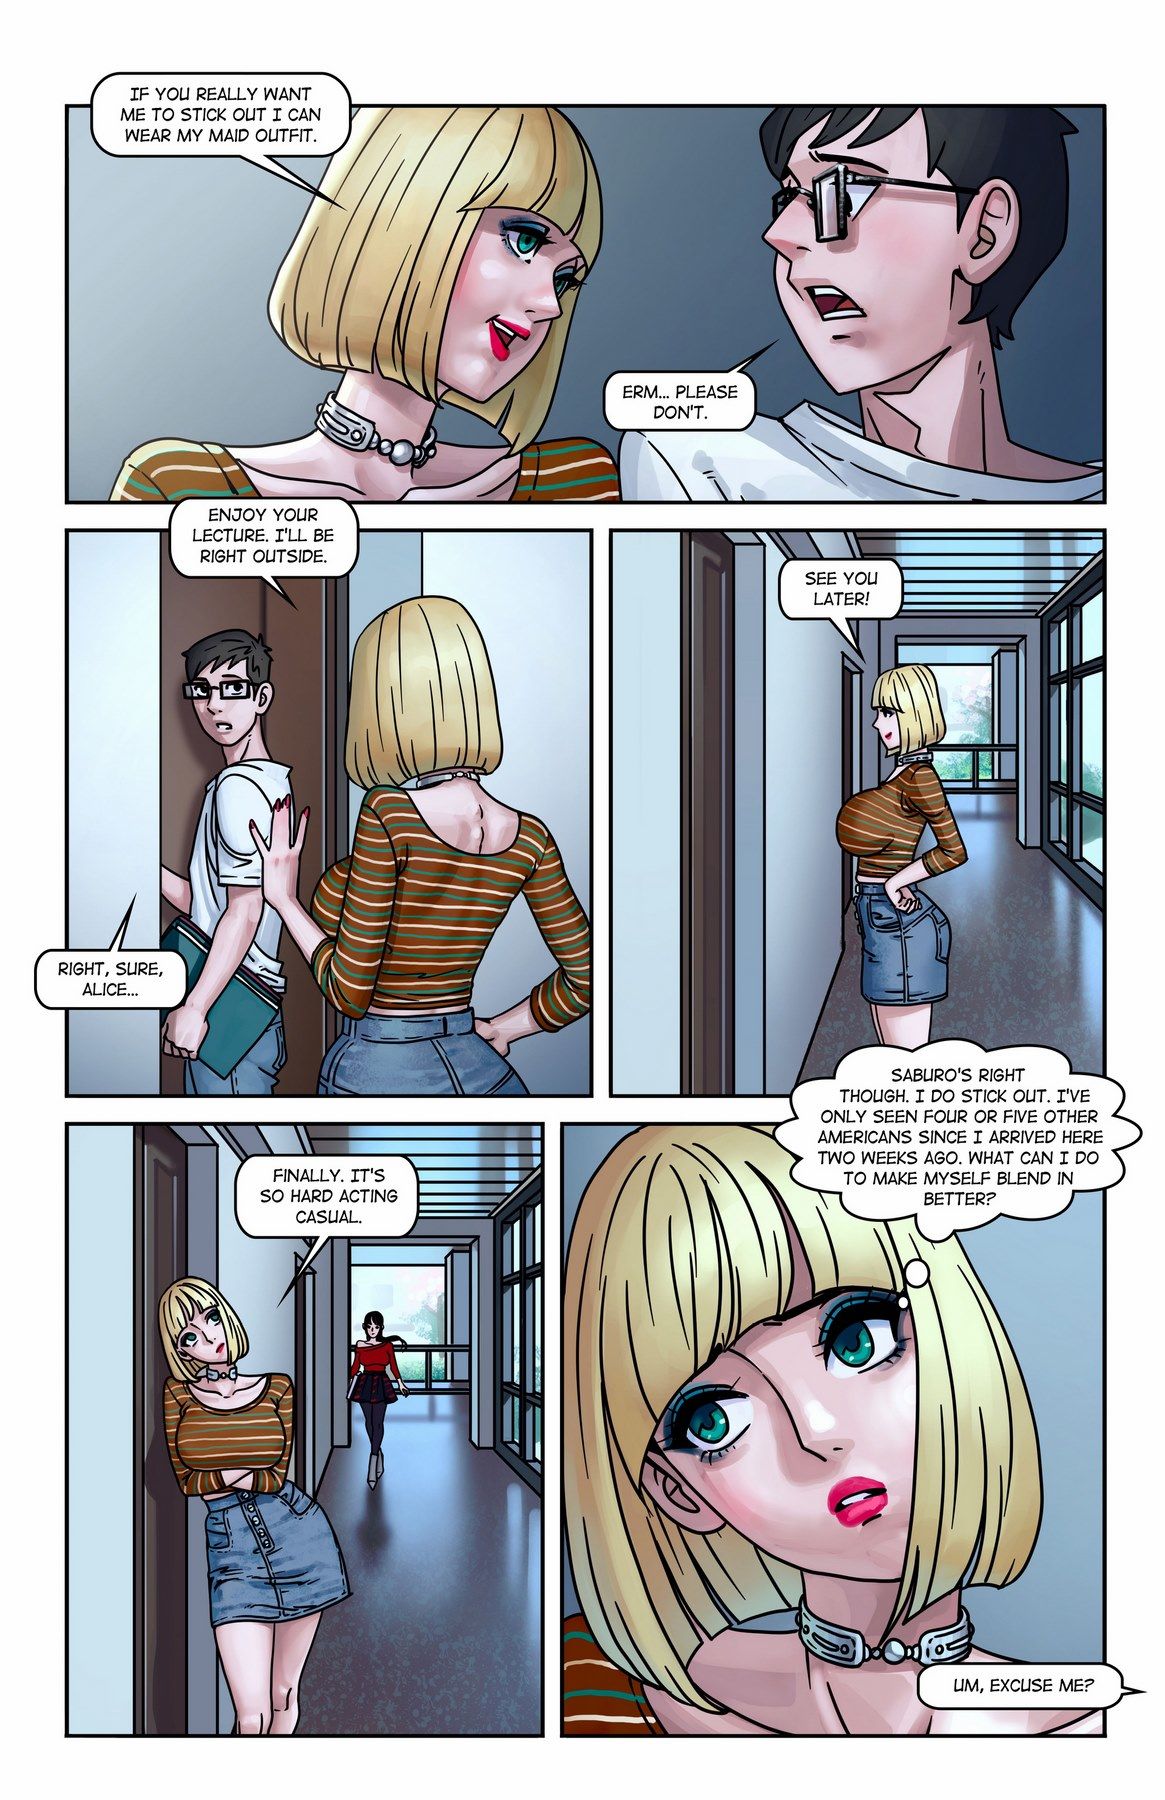 Maid of Honor Issue 02 MuscleFan page 4